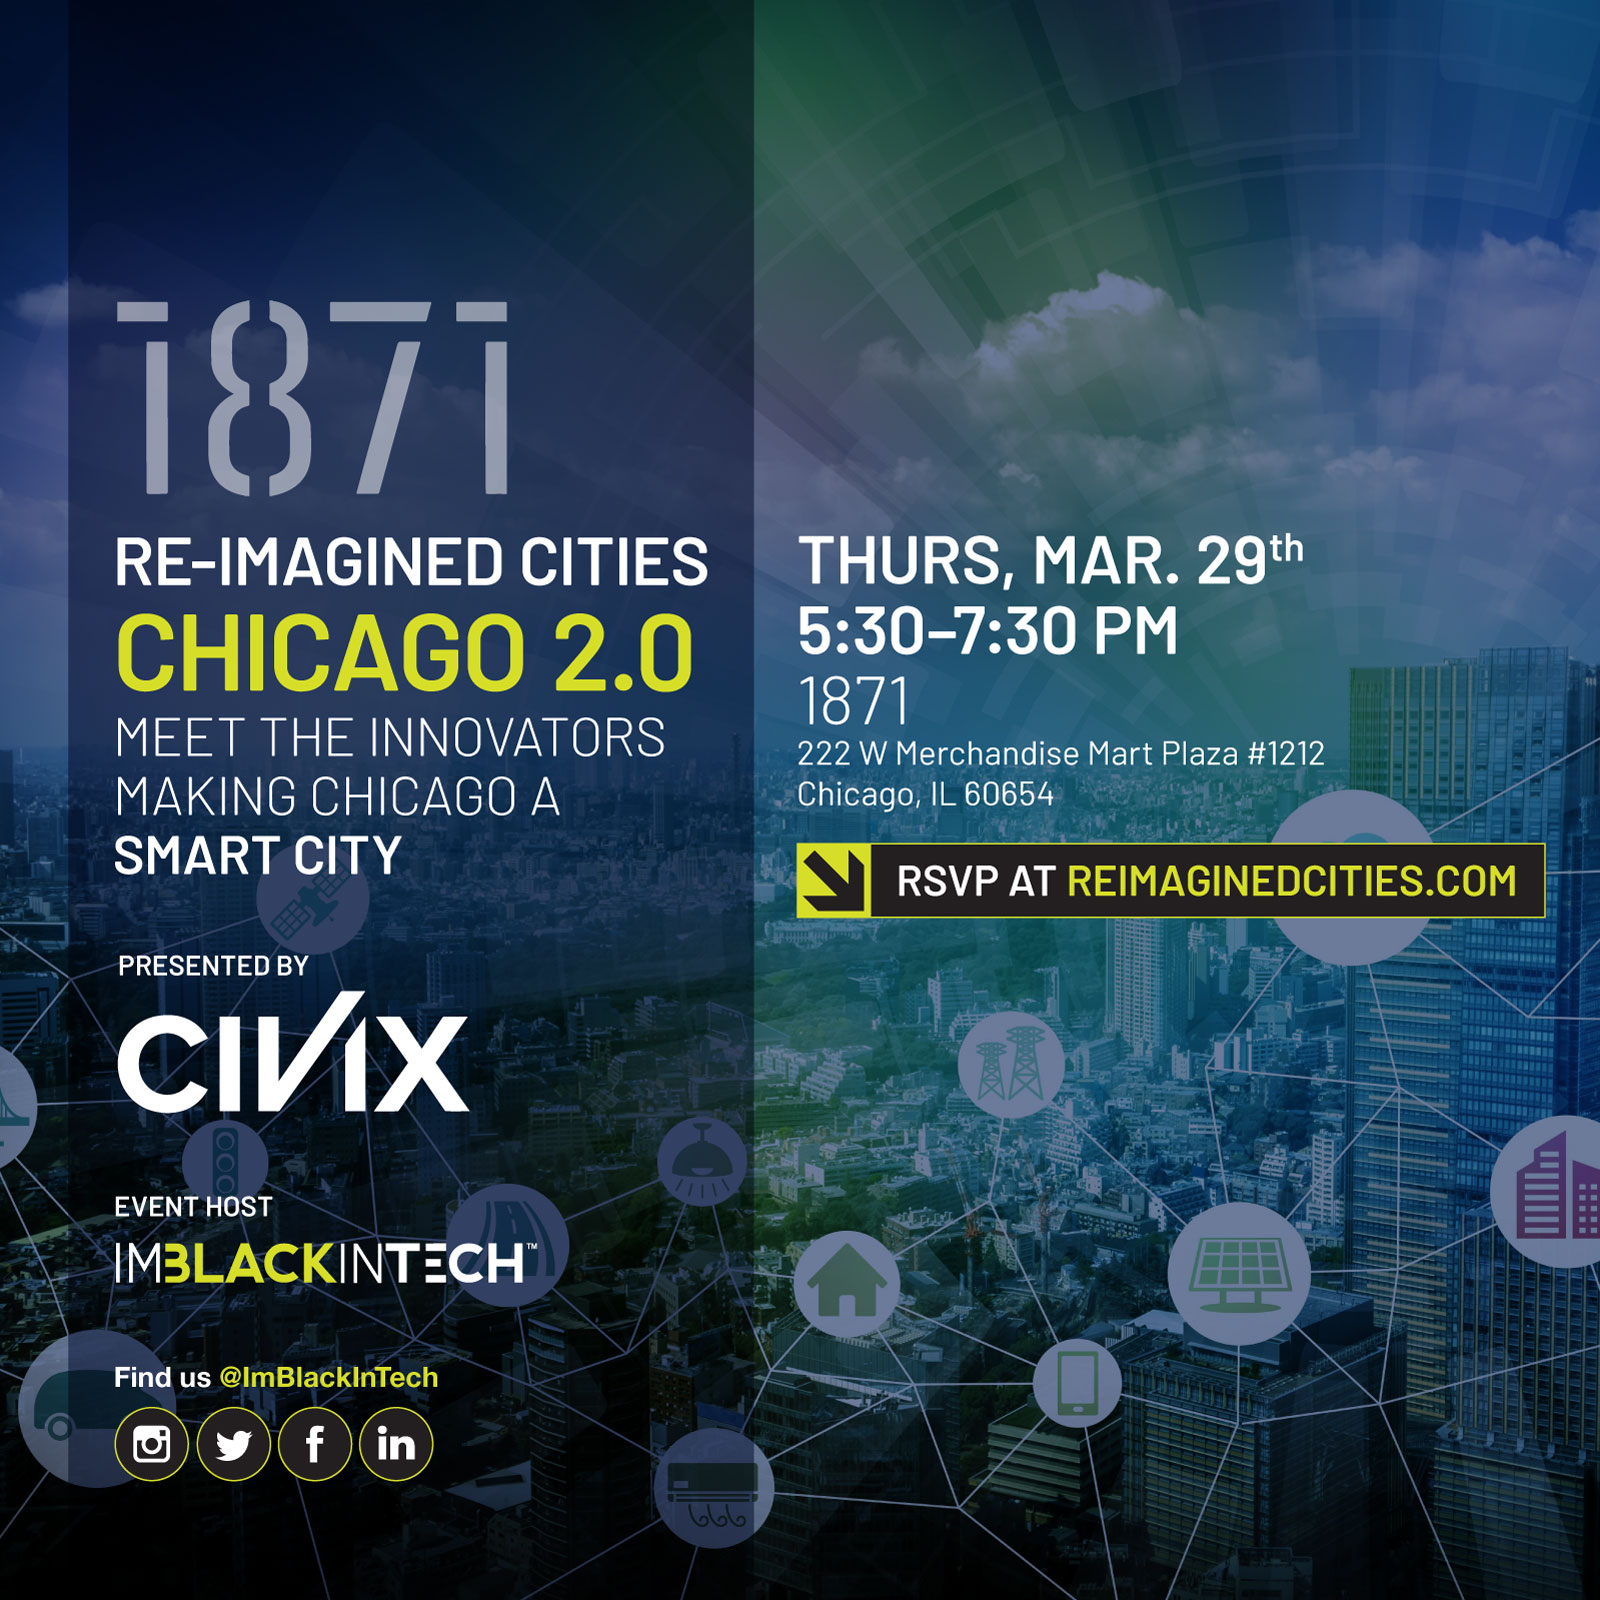  RE-IMAGINED CITIES | CHICAGO 2.0: Meet the Innovators Making Chicago a Smart City